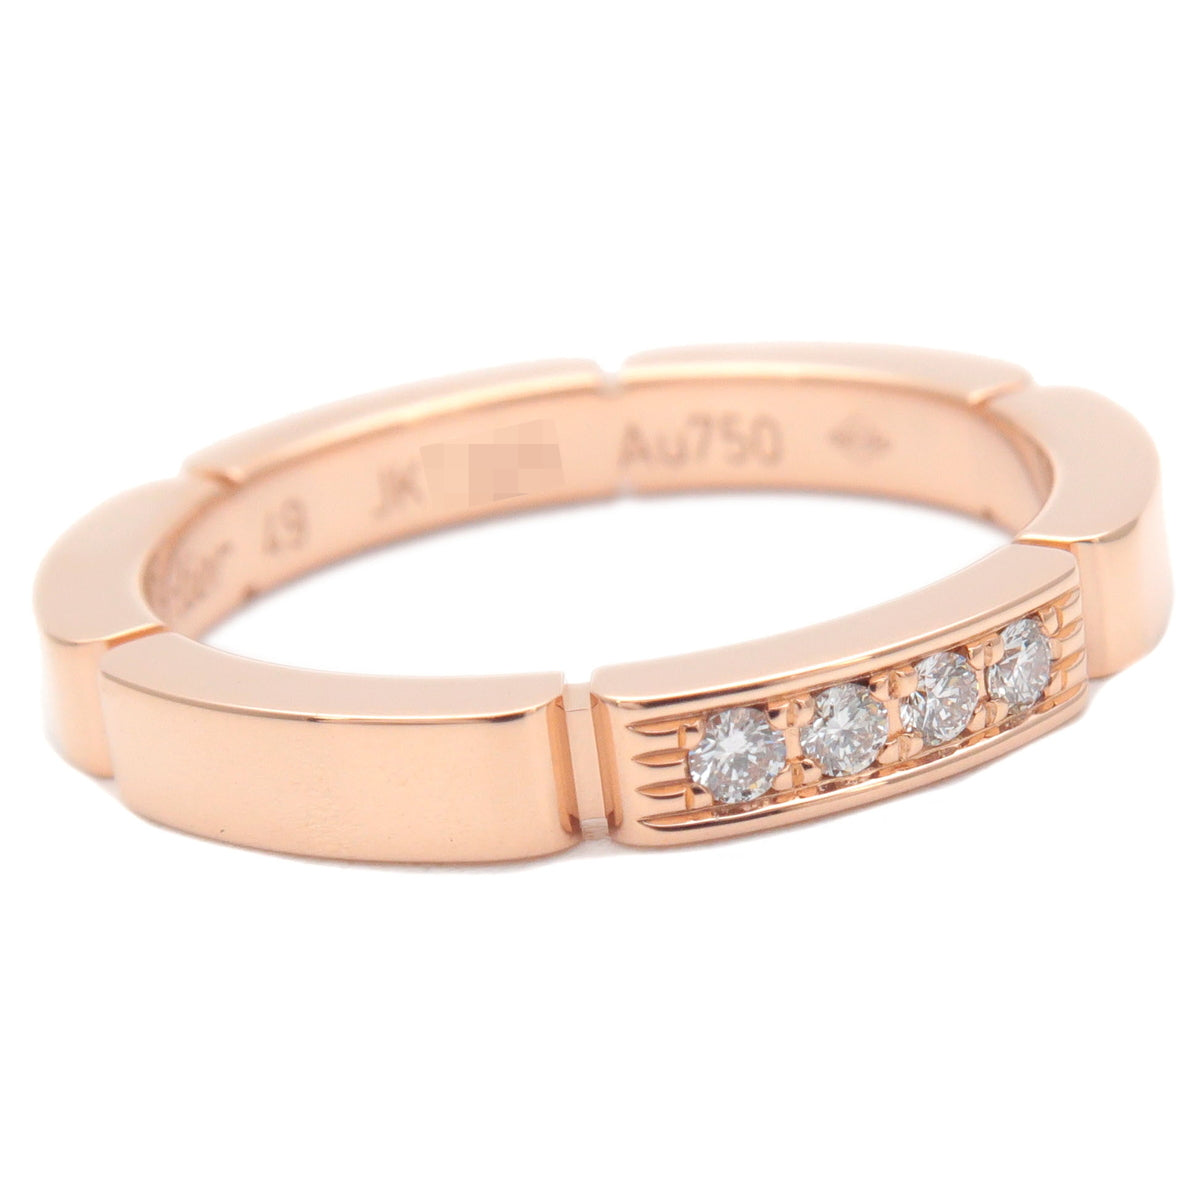 Cartier Maillon Panthere 4P Diamond Ring K18 750 Rose Gold #49 US5